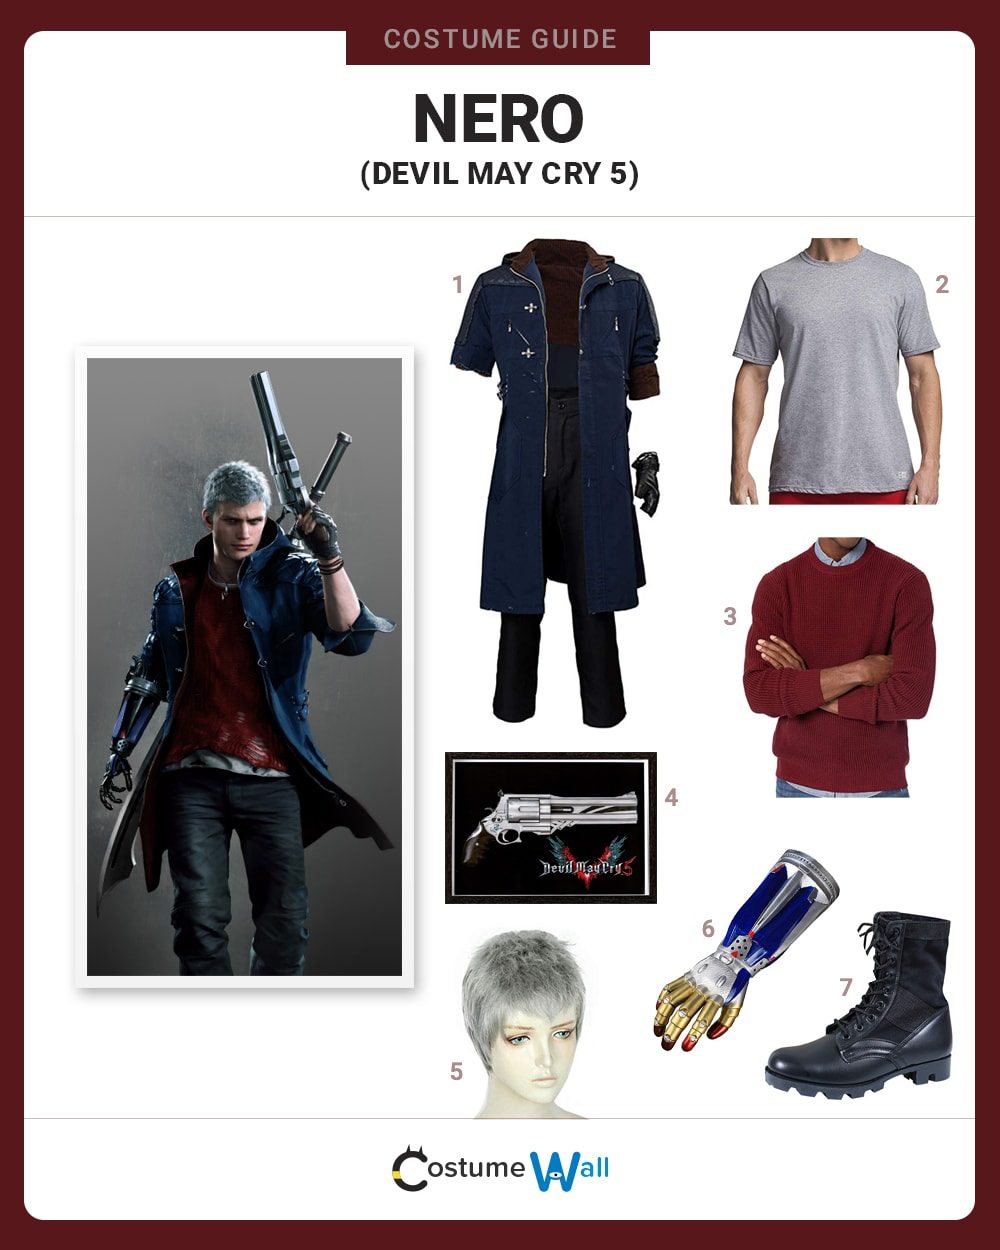 Devil May Cry 5 Cosplay DMC5 NERO Costume Adult Men Halloween Outfit Full Set 